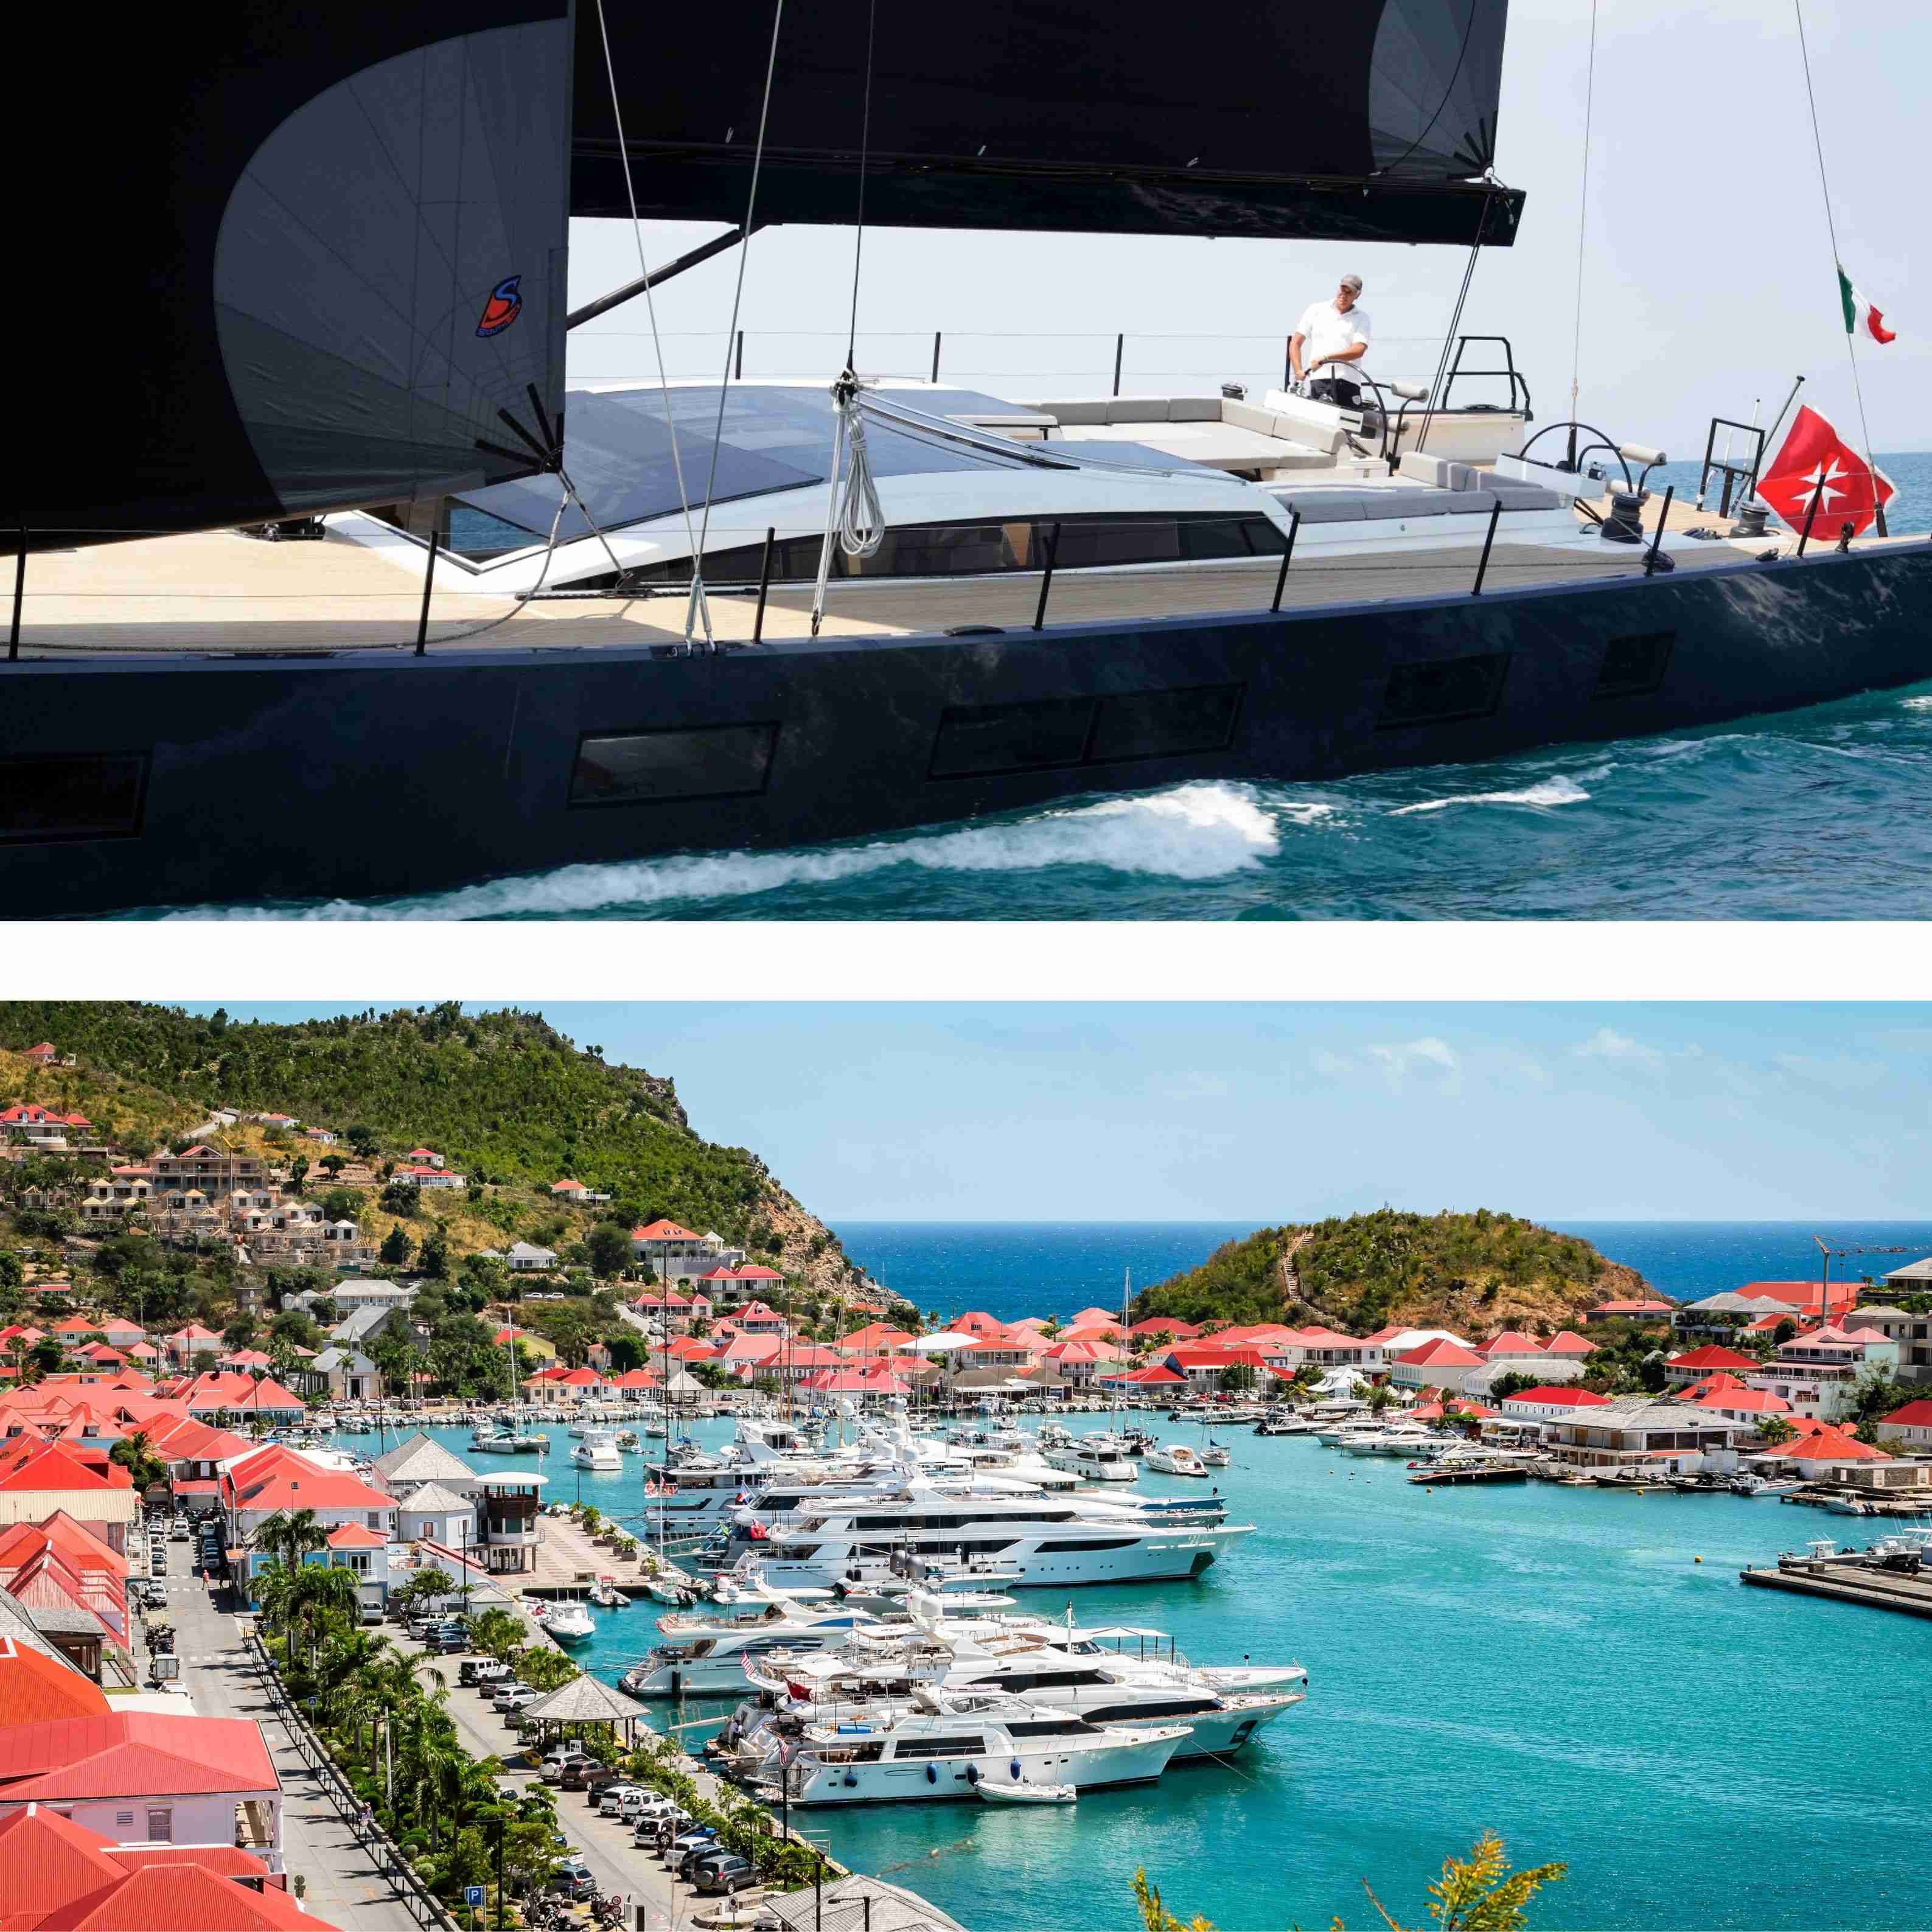 LUCE GUIDA : Available for Day Charters in SXM & SXB